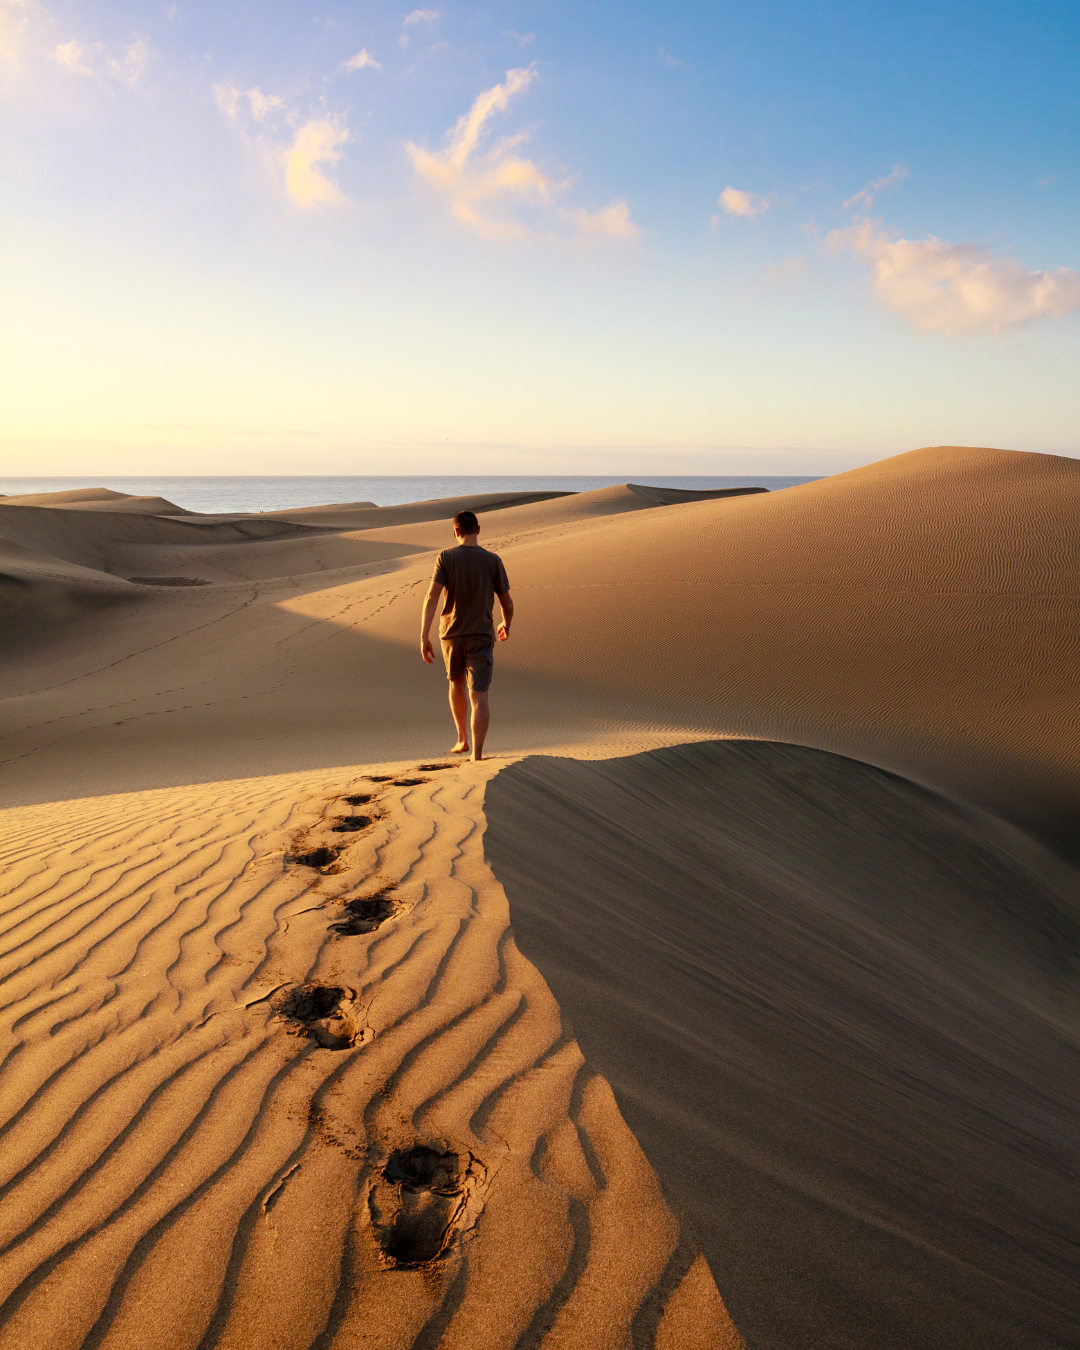 Man Walking on the Maspalomas Dunes, Sand Dunes Located On The South Coast of The Island of Gran Canaria, Province of Las Palmas, in the Canary Islands, Spain - Gran Canaria Holidays Barter's Travelnet